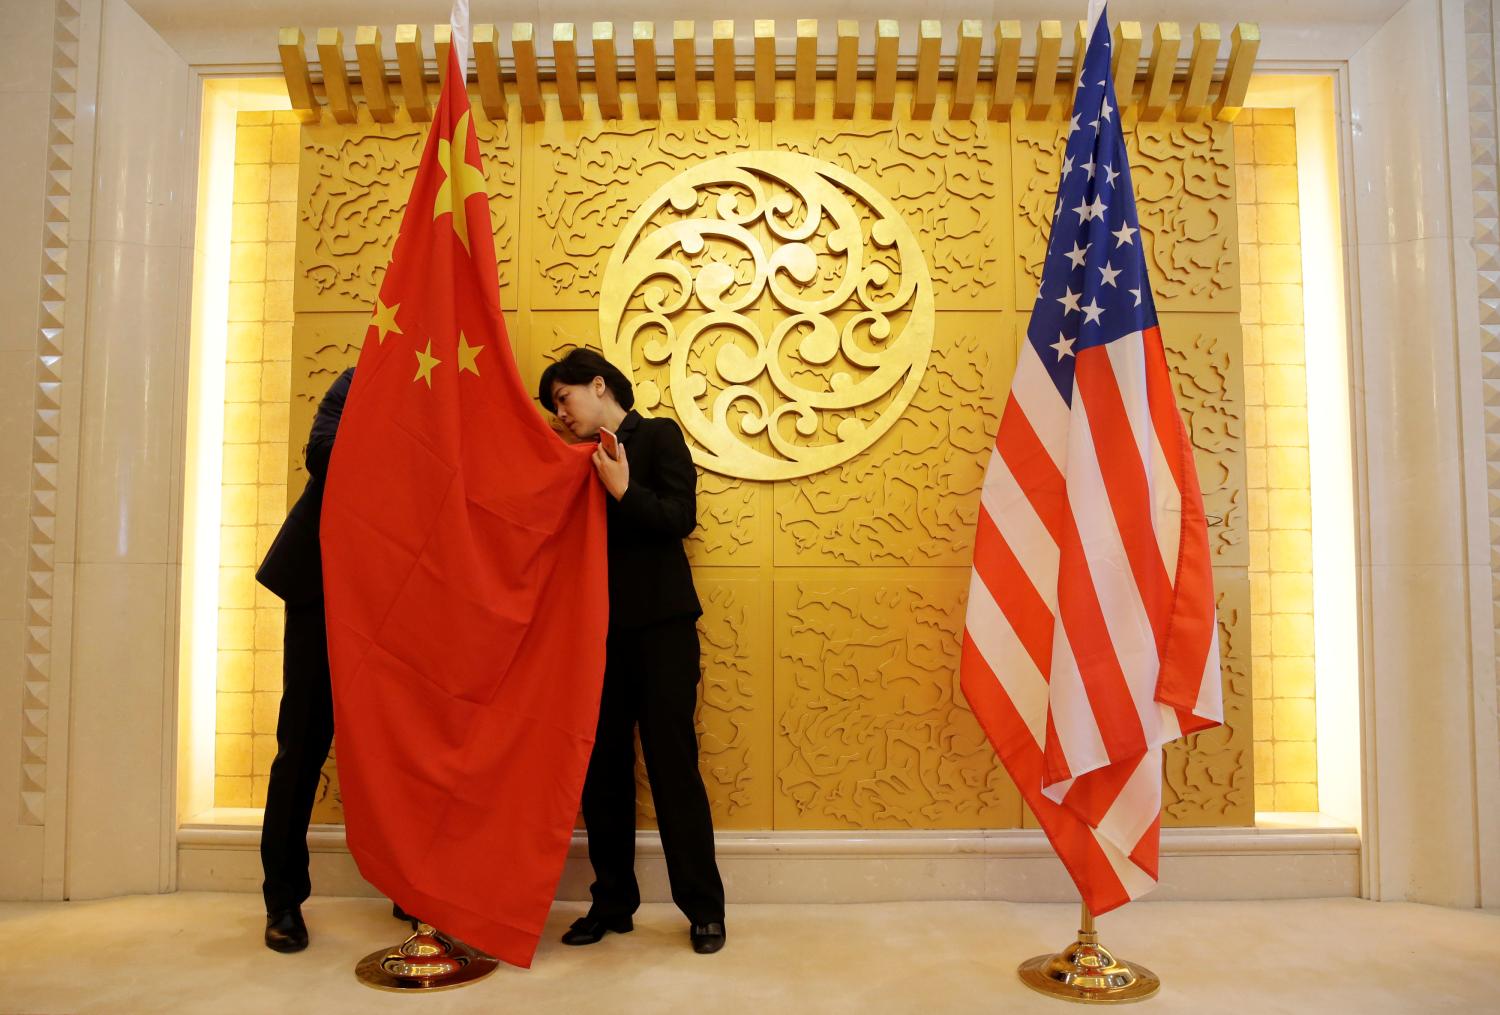 Staff members set up Chinese and U.S. flags for a meeting between Chinese Transport Minister Li Xiaopeng and U.S. Secretary of Transportation Elaine Chao at the Ministry of Transport of China in Beijing, China April 27, 2018. REUTERS/Jason Lee/Pool - RC155E3642C0